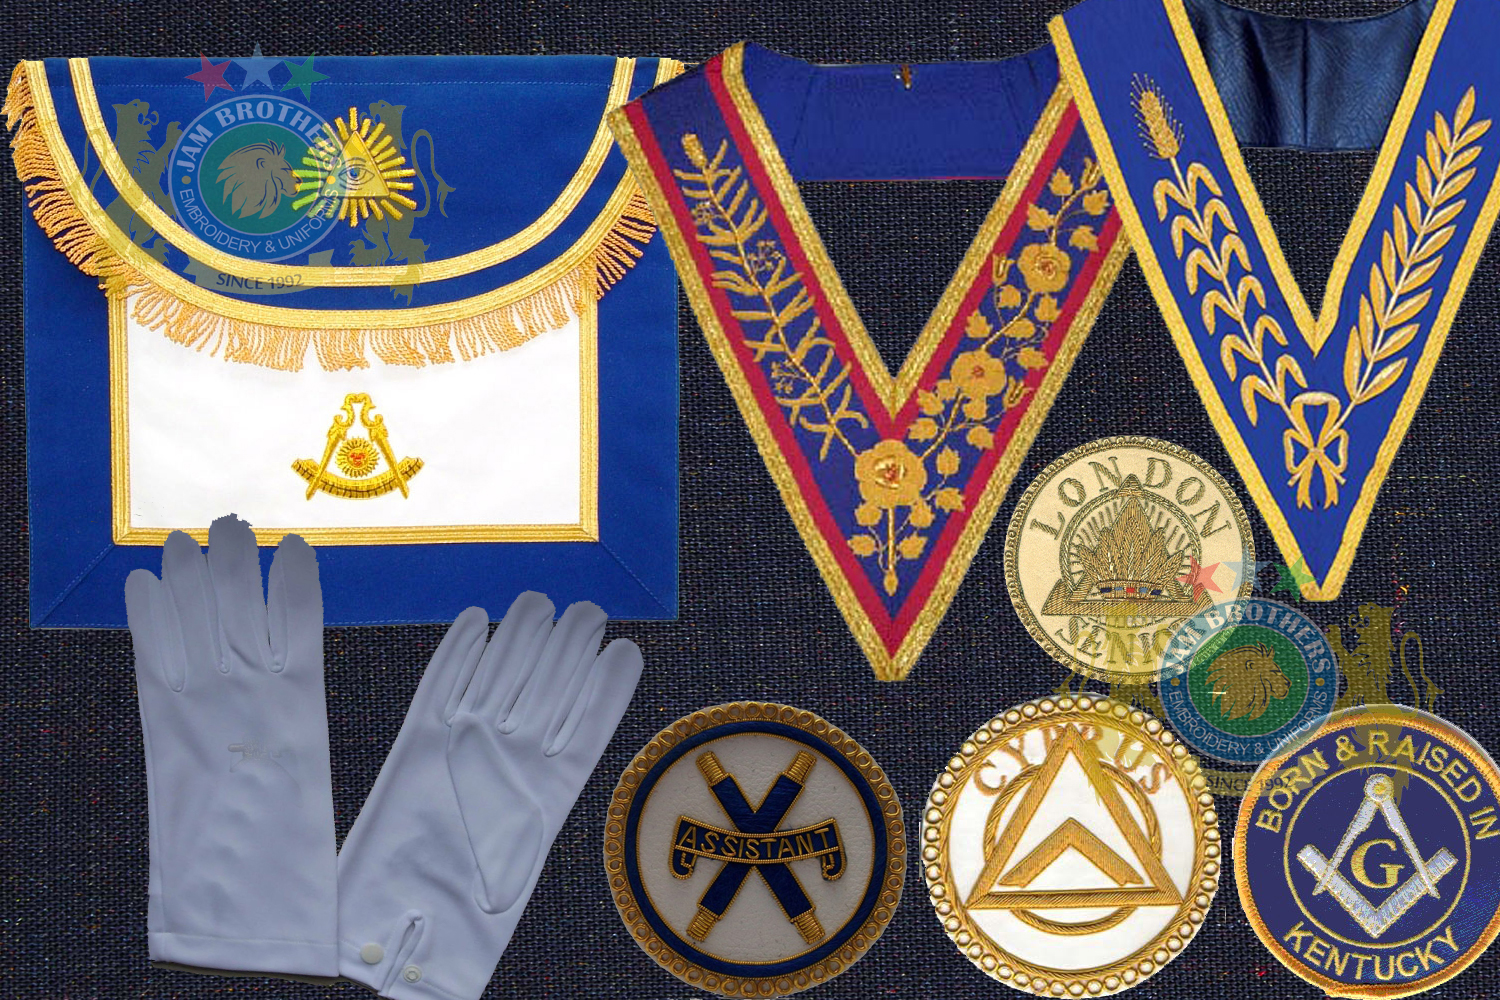 Freemason Products Apron Gloves Compass Logo Eye Freemason Patches Scarf Bag Masonry Flags Banners Pennants Embroidered Hand Machine Printed Clubs Promotional Table Flags Car Flag Hoisting Flags Ranks Shoulders Sliders Bullion Shoulder Ranks Naval Army History Period Epaullettes Epaulet Shoulder Rank Slider Caps Hats Officer Caps Berets Military Honor Cap Sports Cap Beanie Officer hat officer cap Lanyard Sword Knot Aiguillettes Braid Rope Ribbon Accessories Military Uniform Accouterments Lace Trimming Braid Gold White Silver Blue Weave Weaving Uniforms Accouterments Tailor Belts Leather Ceremonial Combat Cadet Parade Belts #Hand Embroidery #BullionEmbroidery #TradeBadges #MessDress #Badges #Ranks #Regiment #Parade #Ceremonial #Cord #Textile #ArmedForces #BritishArmy #Army #Aiguillette #Military #MilitaryUniforms #Militaria #Insignia #Headwear #Caps #OfficerCaps #UniformCaps #PeakCaps #DressCaps #MilitaryCaps #RailCap #Berets #Glengarry #RoyalNavy #RoyalMarine #RoyalAirForce #RAF #Infantry #Armor #EME #Battalion #Medals #Ribbons #Braid #Lace #Uniforms #UniformSupplie #Police #Security #Buckles #Guards #Accoutrement #Badge #Patch #Machine #MachineEmbroidery #HandEmbroidery #Bullion #BullionBadges #BullionEmbroidery #WovenBadges #Woven # Emblems #Regiment #Regimental #OfficerCaps #PeakCaps #Soldier #Helmets #Covers #HelmetCovers #Armlets #Sliders #Epaulettes #Webbing #Chevron #Officer #ShoulderBoards #Gorgets #Tassel #Sash #Hand #HandSewn #Aviation #AviationClothing #Crest #FamilyCrest #CoatofArms #EmbroideredPillows #Cords #Aiguillettes #CapCords #ChinCord #DressCord #SwordKnot #Tassels #WhistleCord #Lanyard #Knots #Banners #ClanBadges #Peaks #Visor #Wings #CapBadges #Pennants #HonorCaps #OfficerCaps #SportsCap #Masonic #Aprons #MasonicAprons #Collars #MasonicCollars #Gloves #MasonicGloves #MasonicPatches #Patches #Regalia #MasonicRegalia #Freemason #Braid #Chevron #Cuffs #Fringes #Sashes #HeadGear #FieldGear #England #USA #Poland #ArmedForces #Schools #Colleges #University #Sialkot #Pakistan Sialkot Pakistan PeakCaps OfficerCaps ShoulderRanks BullionBadges UniformAccessories MilitaryUniforms DressCap TradeBadge RankMarking WireBadges Army Airforce Navy Police